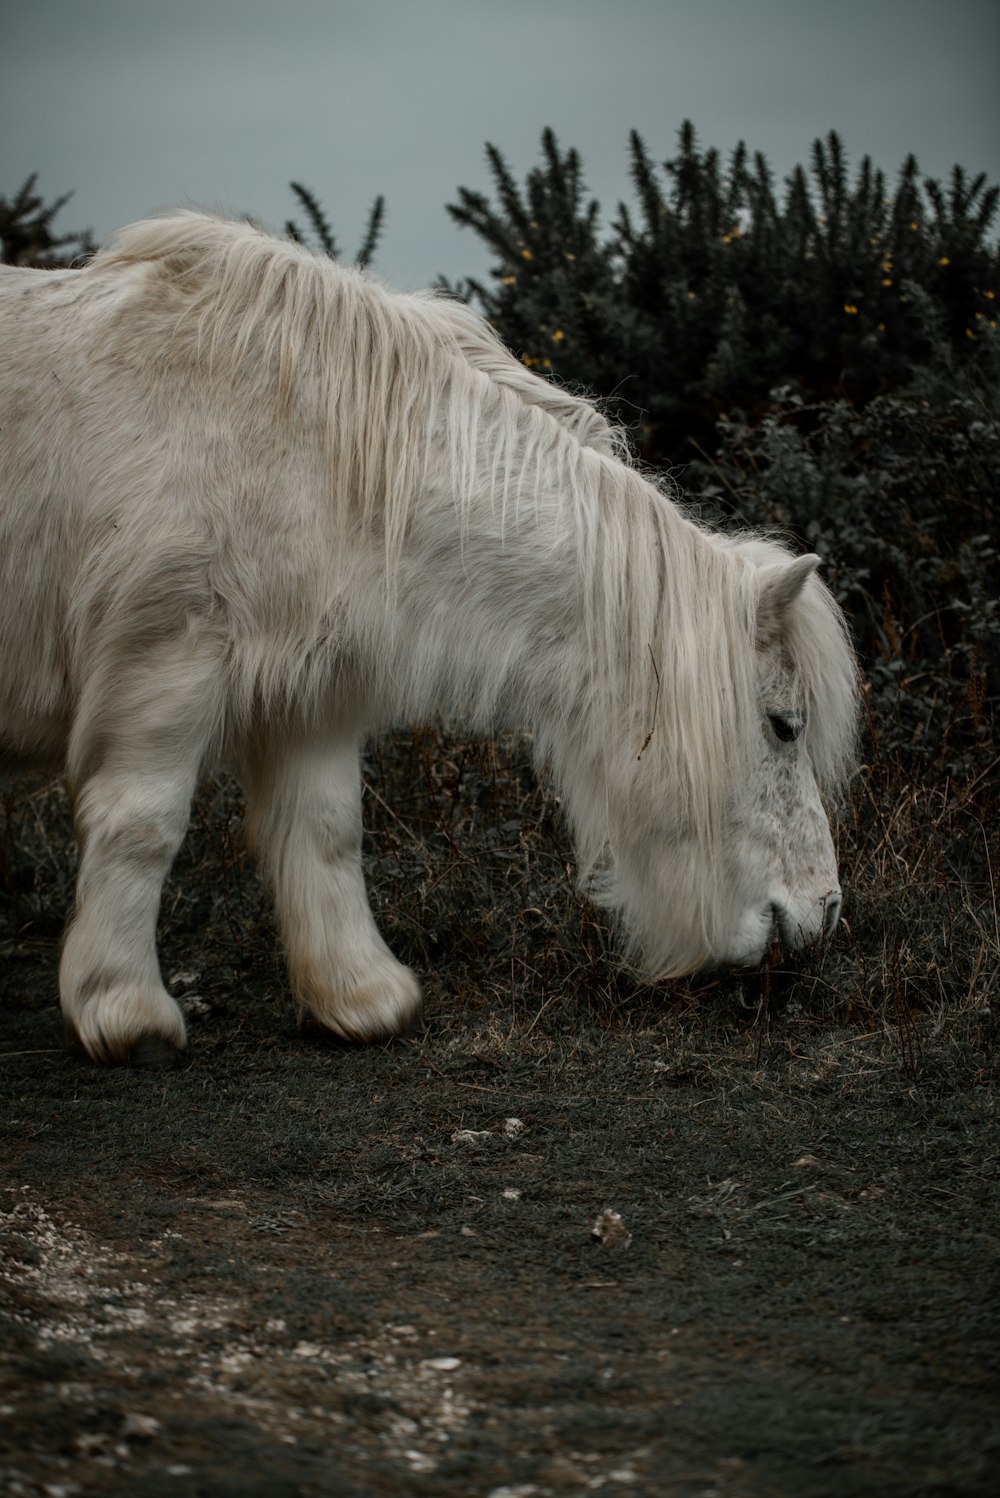 a white horse with long hair grazing in a field